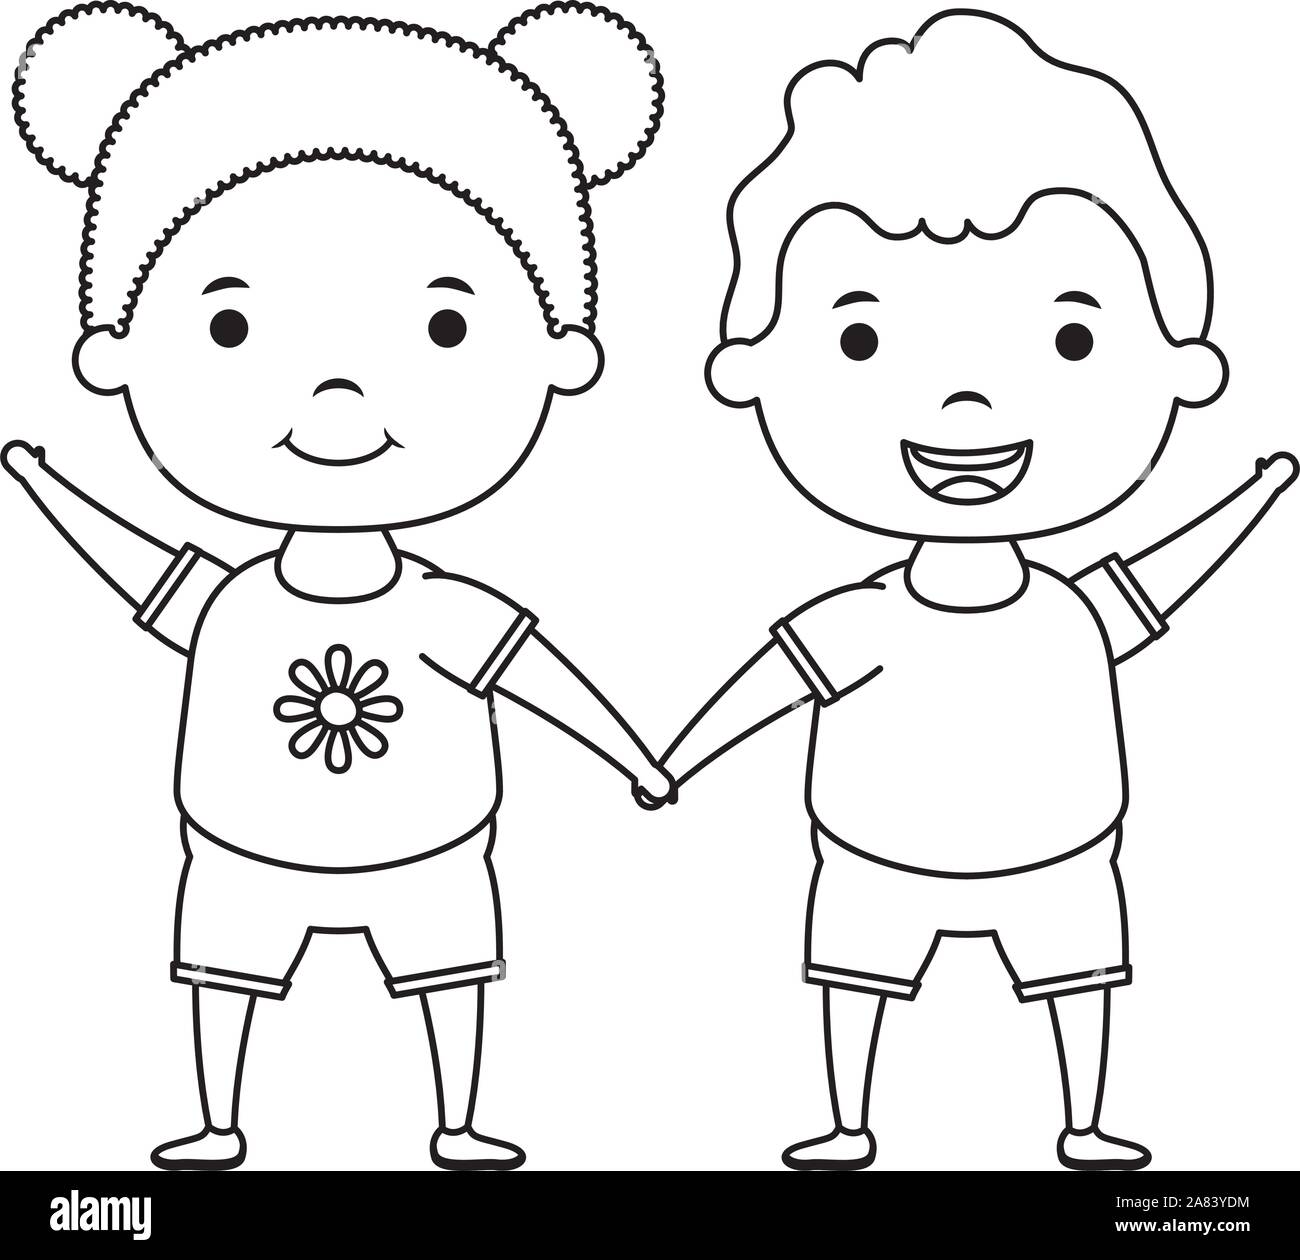 Cartoon Characters Boy Girl Black And White Stock Photos Images Alamy